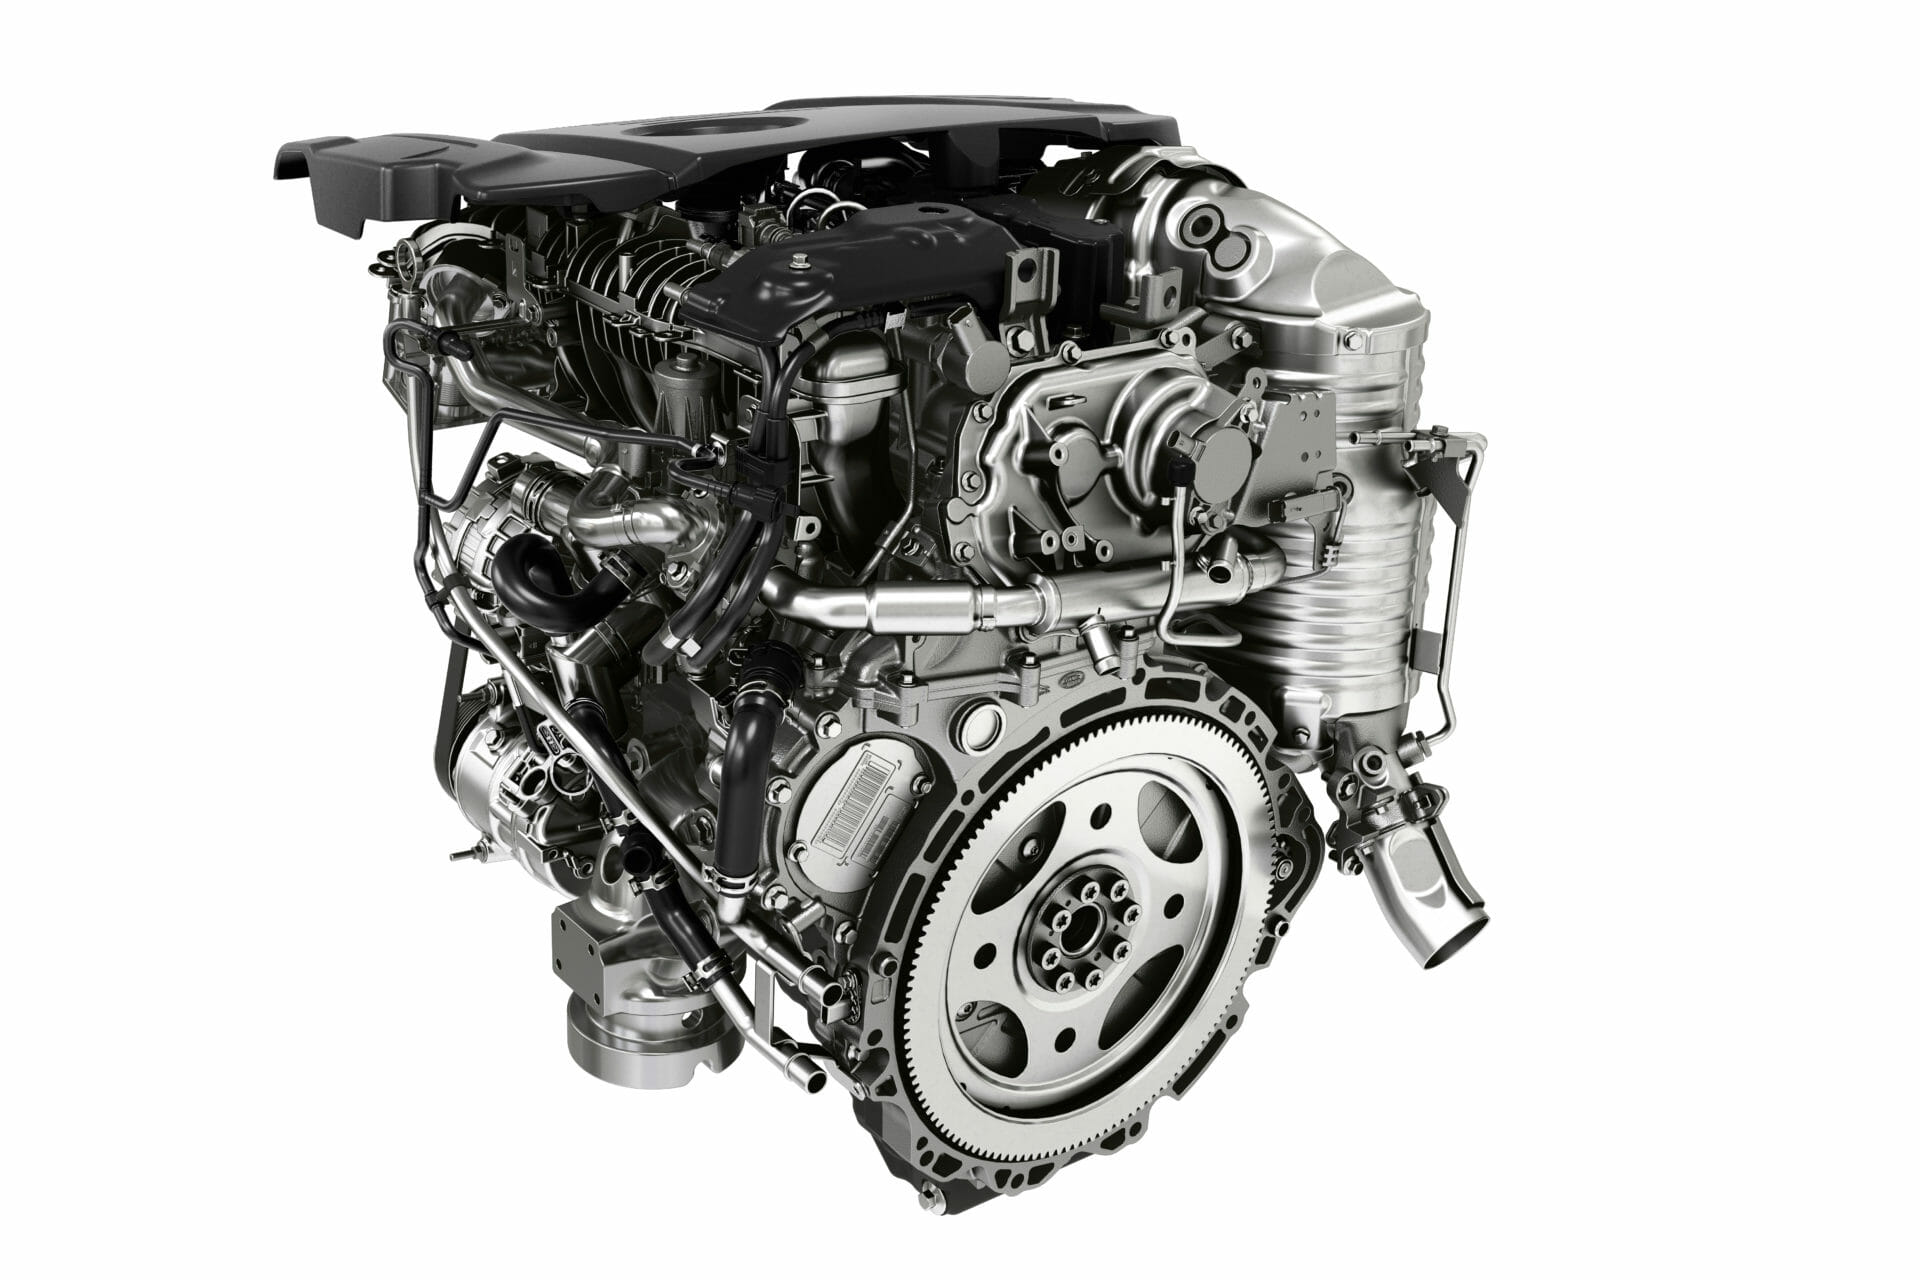 2.0L Turbocharged Ingenium I4 P300 from a Discovery Photo By Land Rover